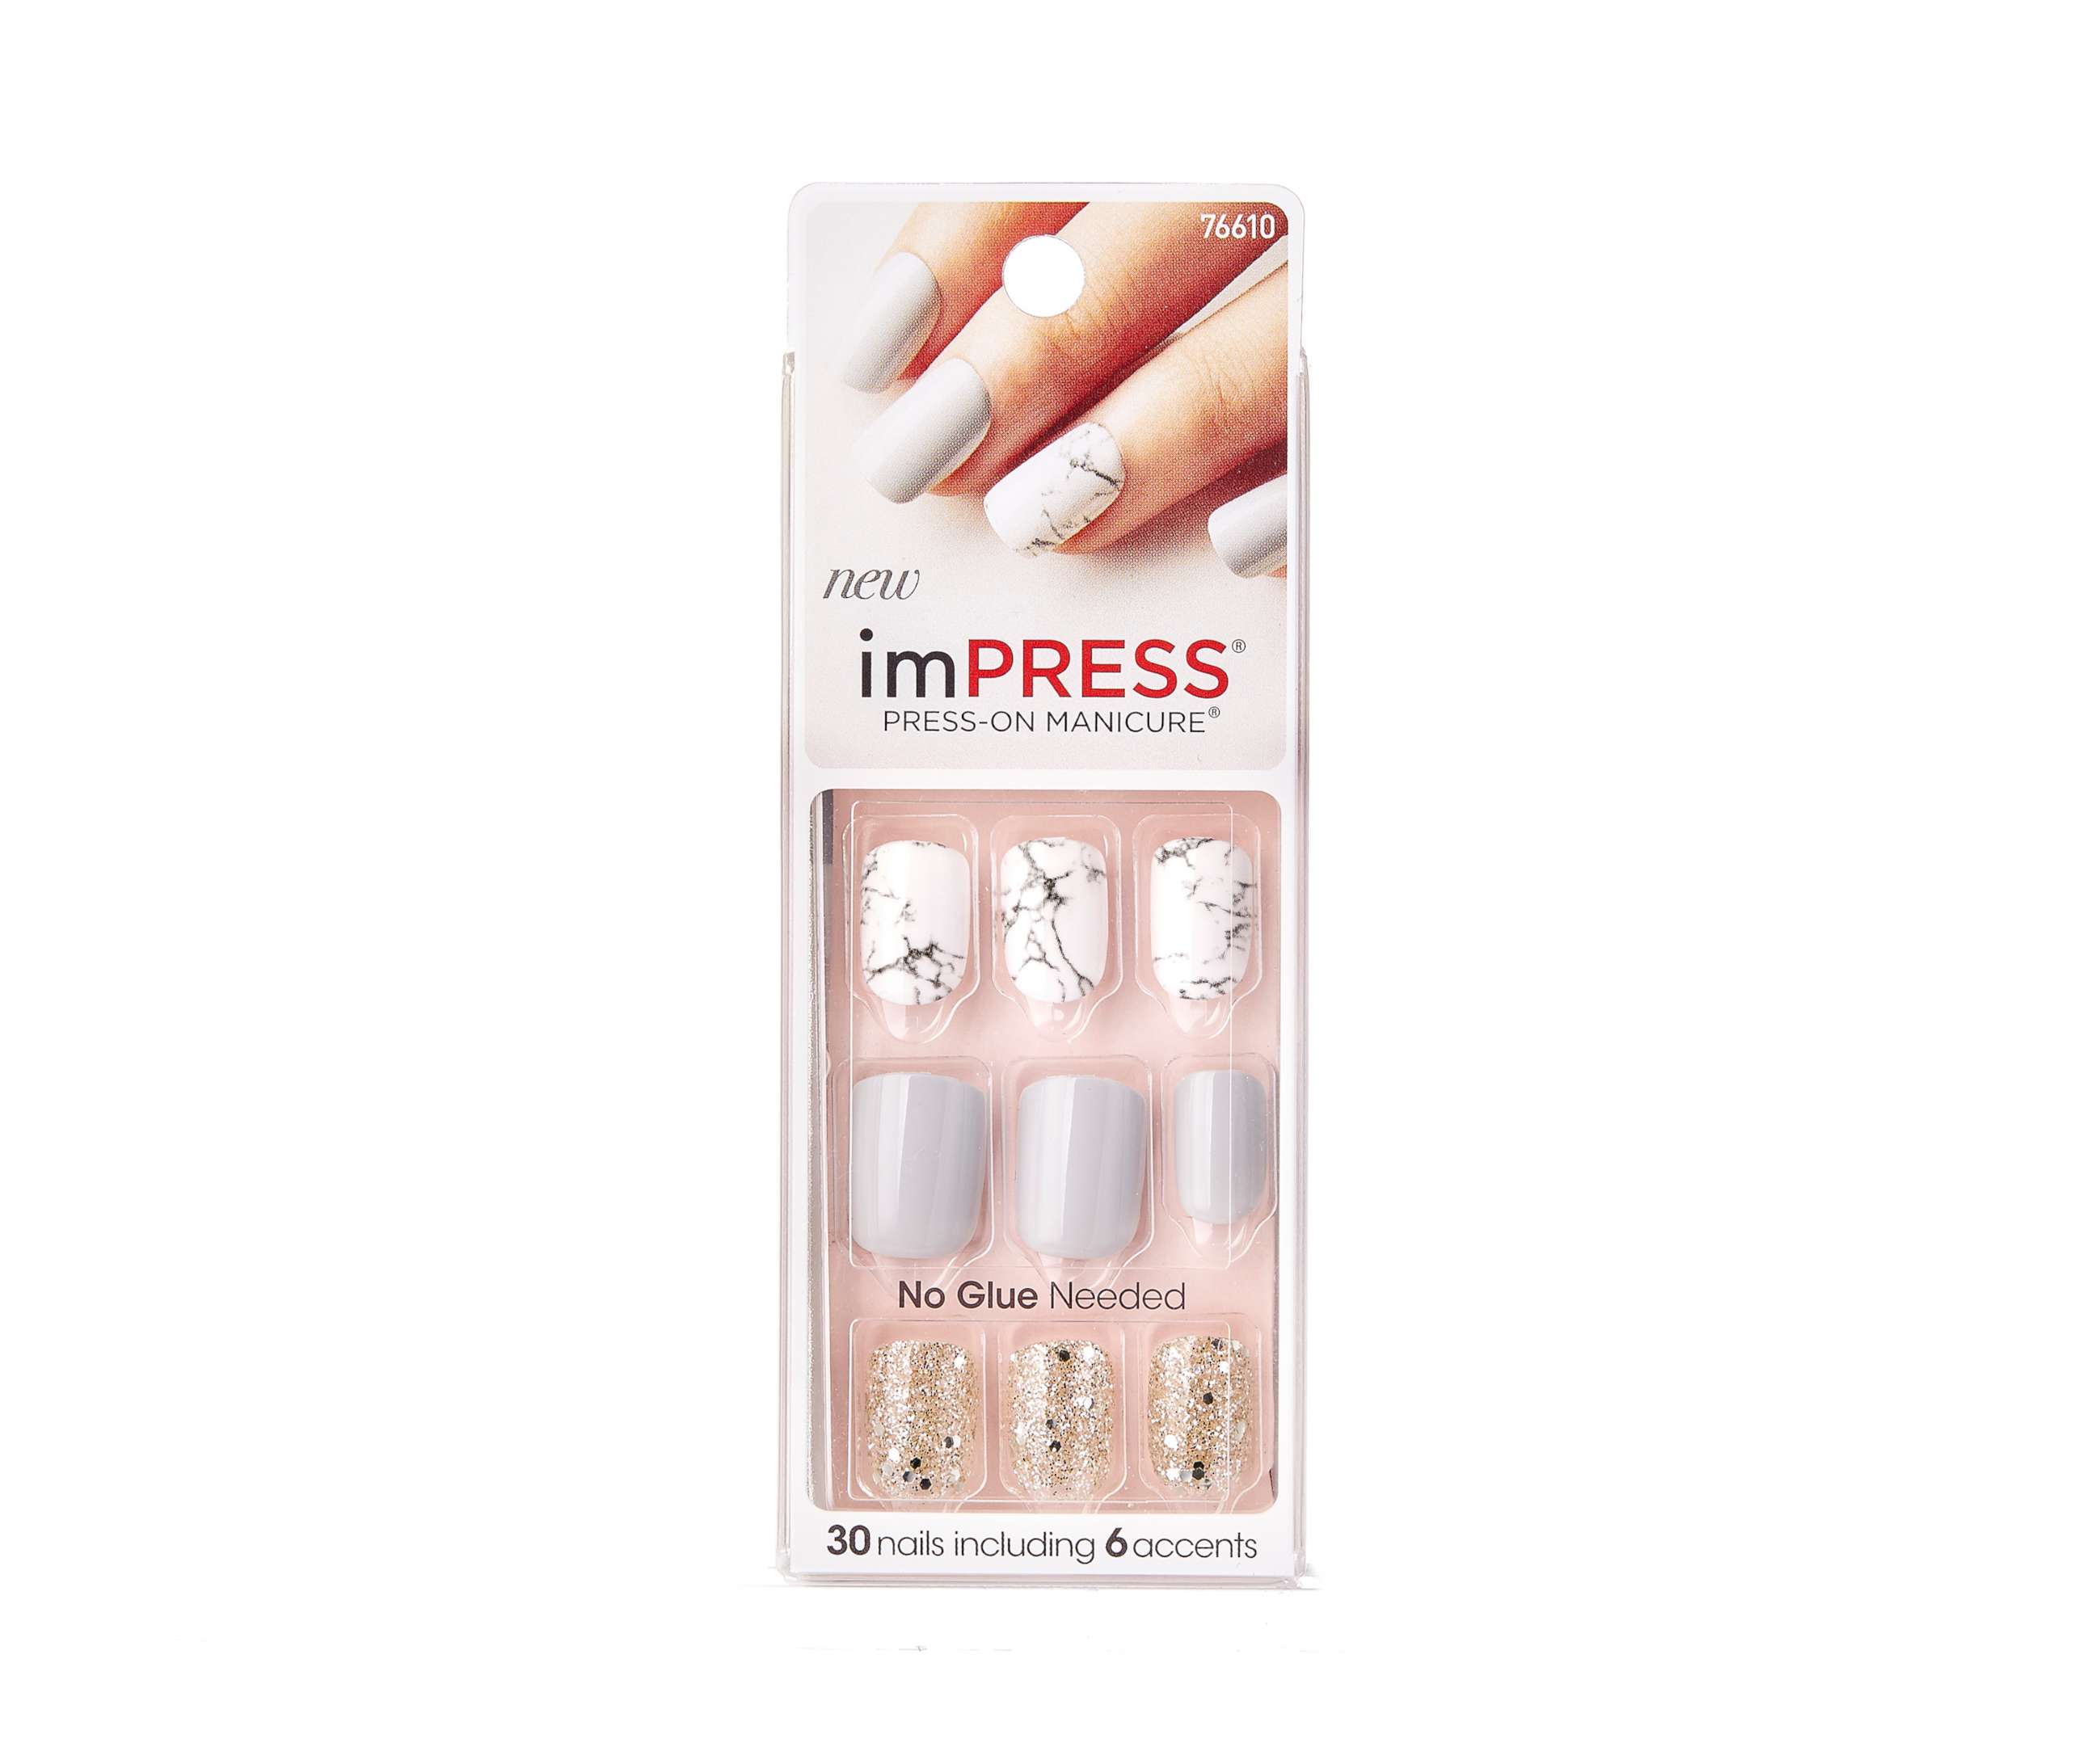 PHOTO: imPress Press-On Manicure 3.0, $7.99, available at drugstores. 